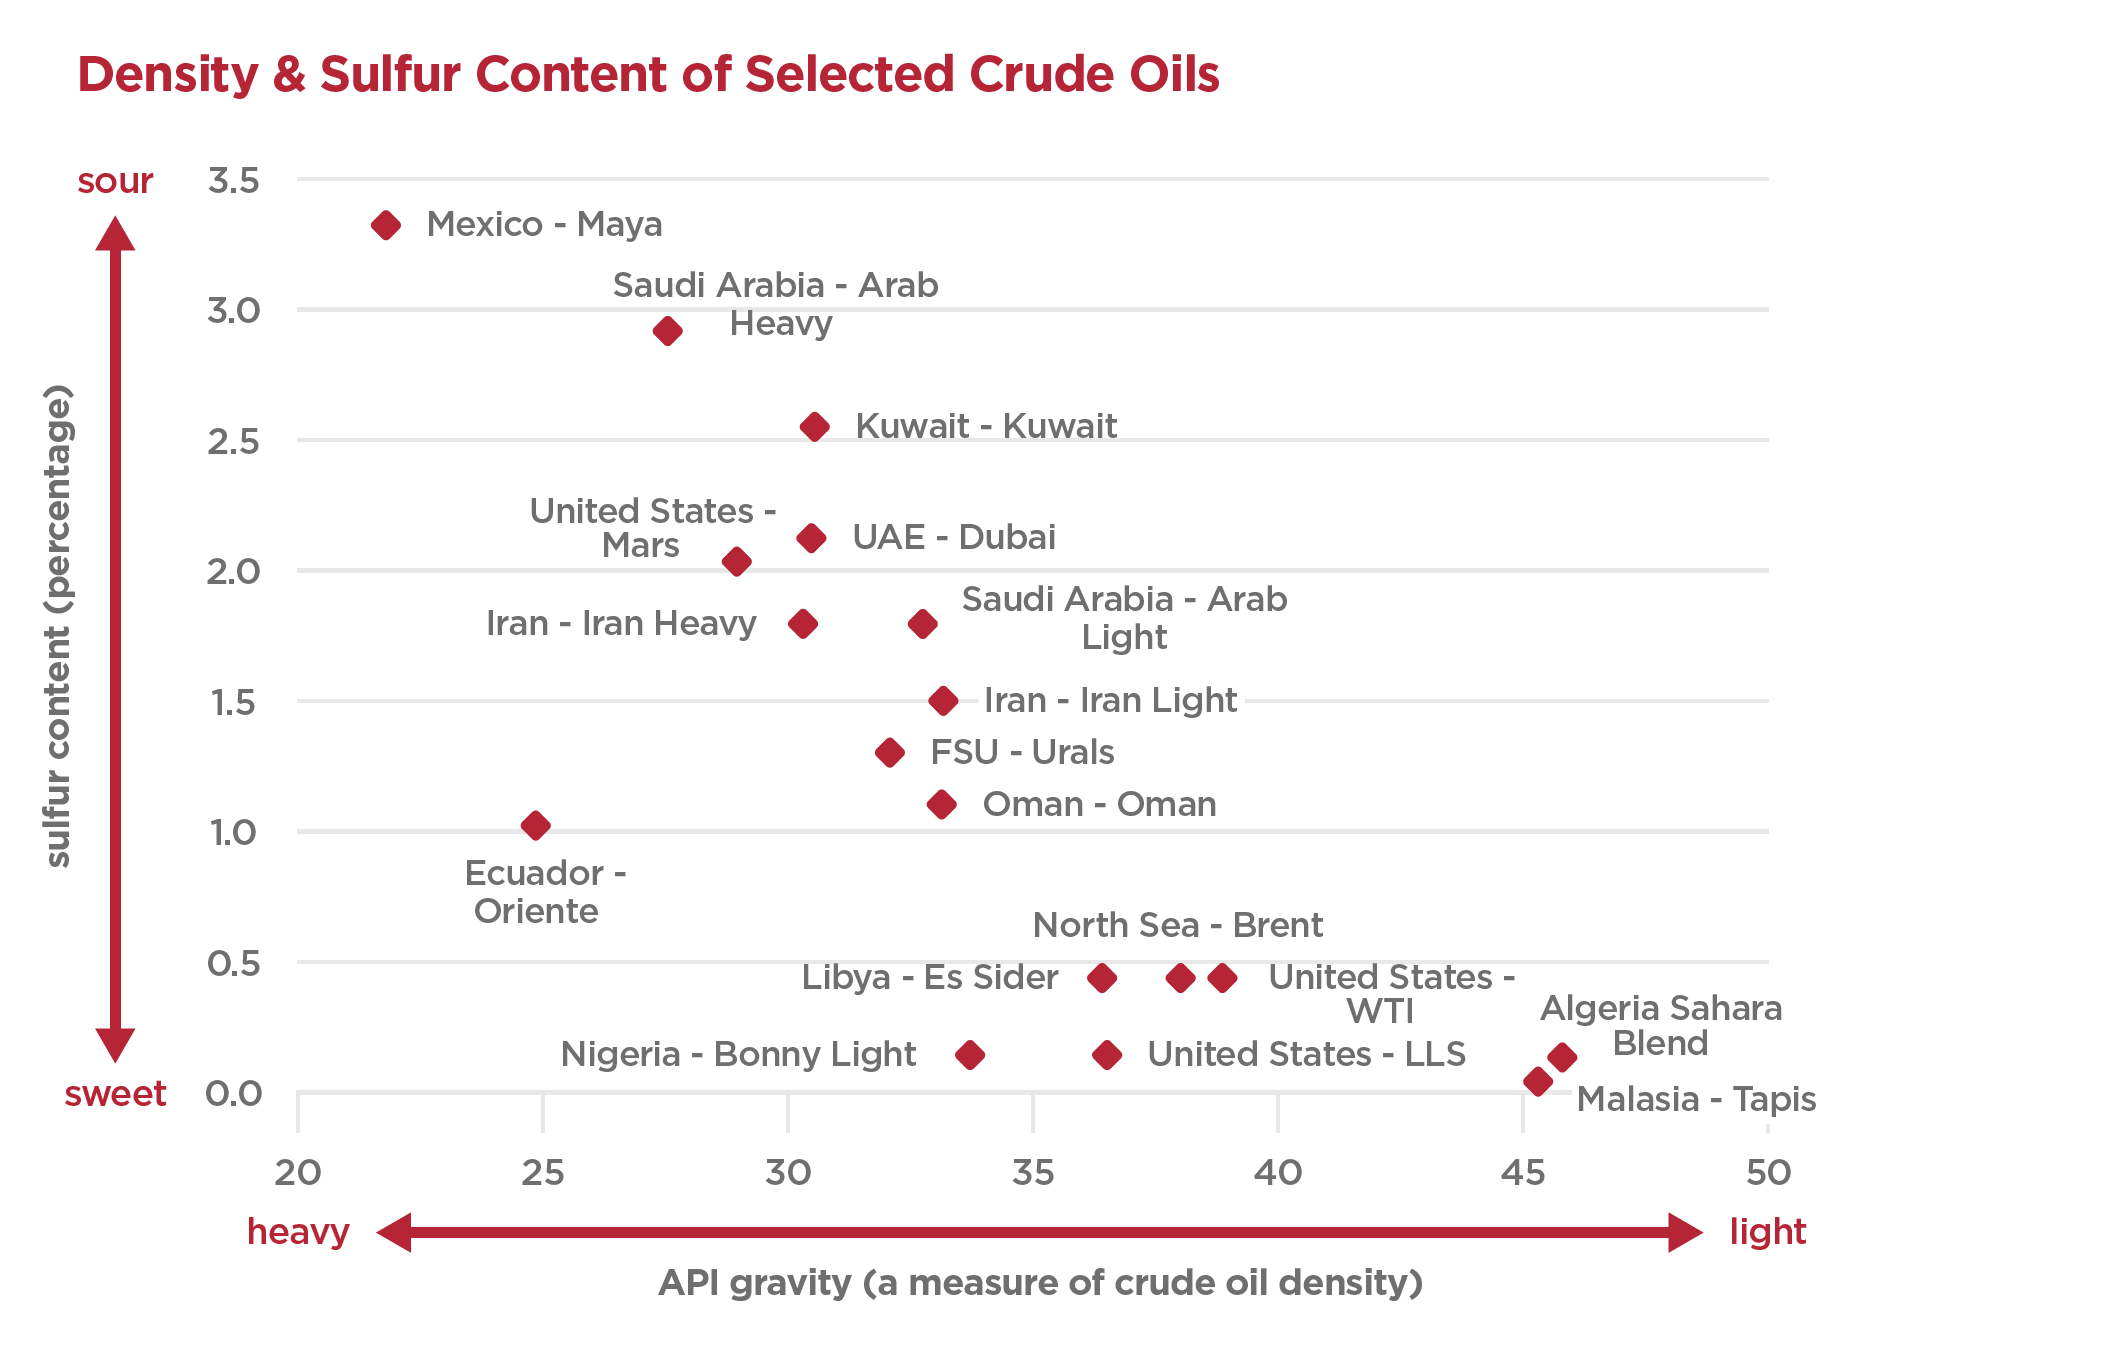 Density and sulfur content of selected crude oils